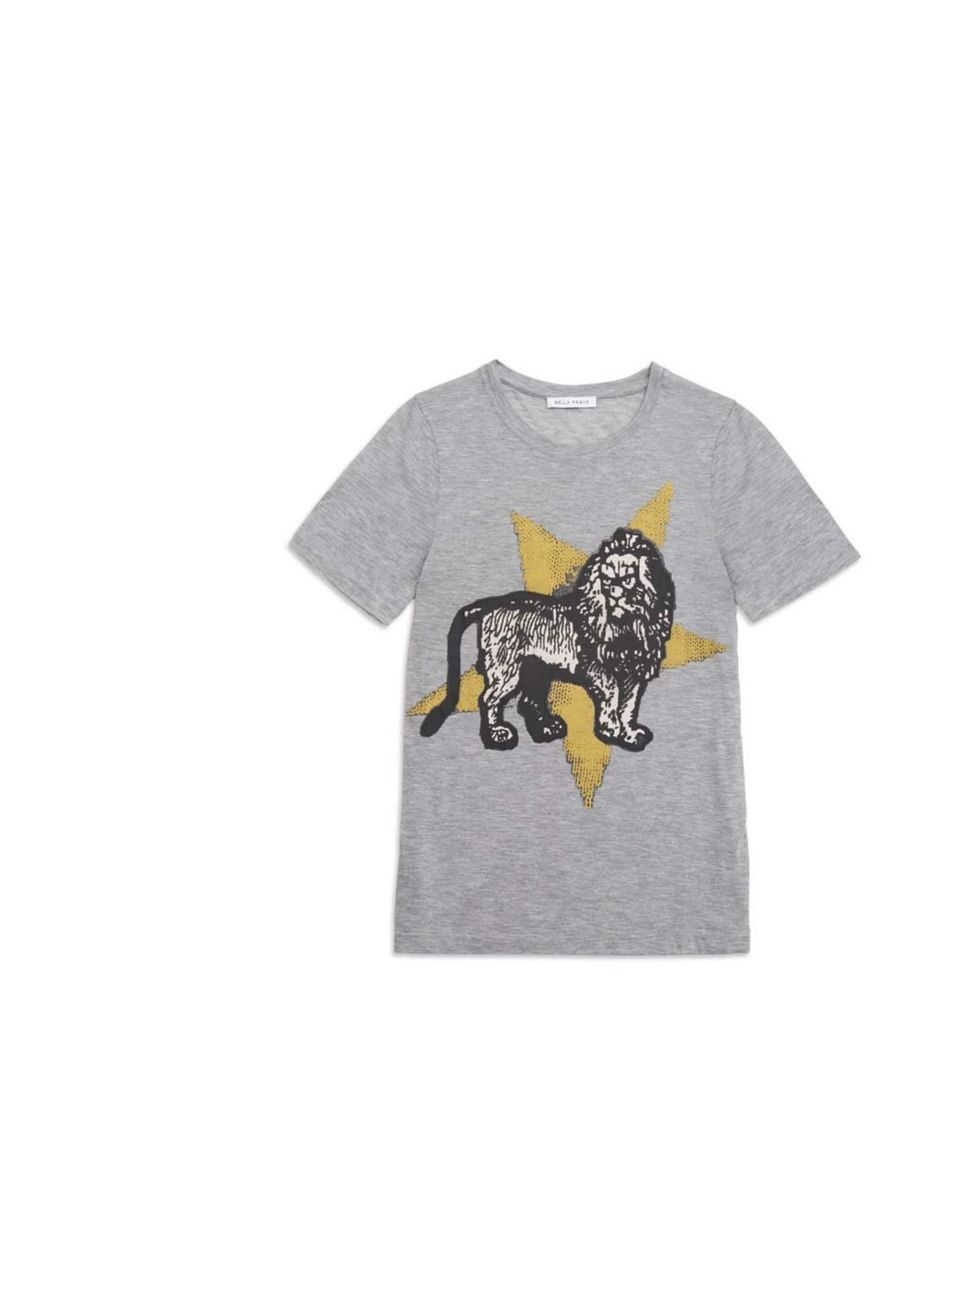 <p>You'll know Bella Freud for her brilliant slogan knits - now try one of her fab printed tees on for size.  </p><p><a href="http://www.bellafreud.co.uk/shop/ss14/lion-star-t-shirt/">Bella Freud</a> t-shirt, £85</p>